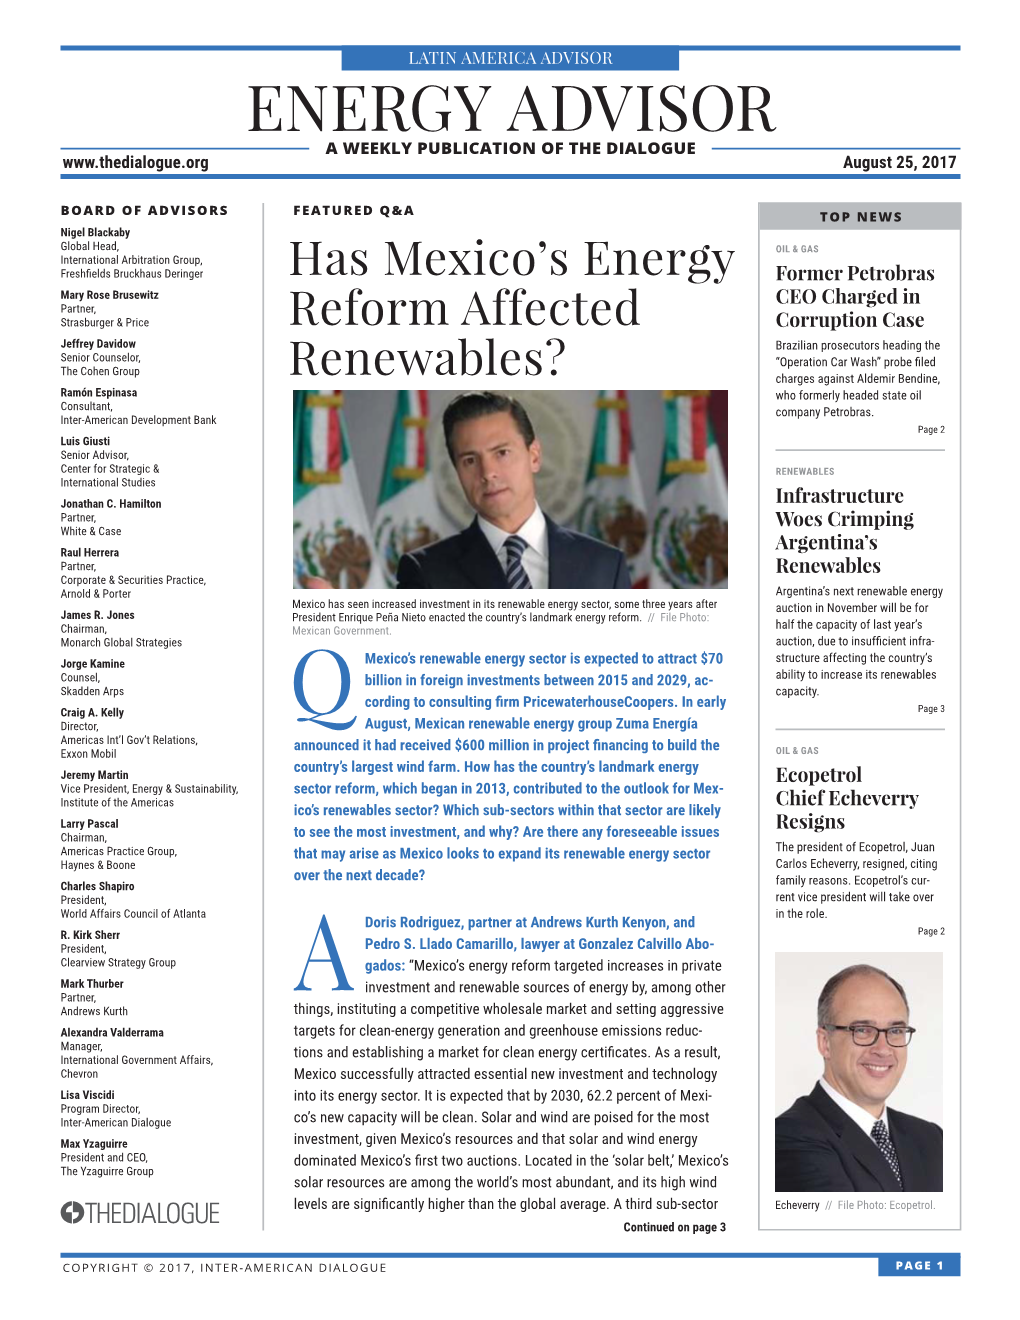 ENERGY ADVISOR a WEEKLY PUBLICATION of the DIALOGUE August 25, 2017